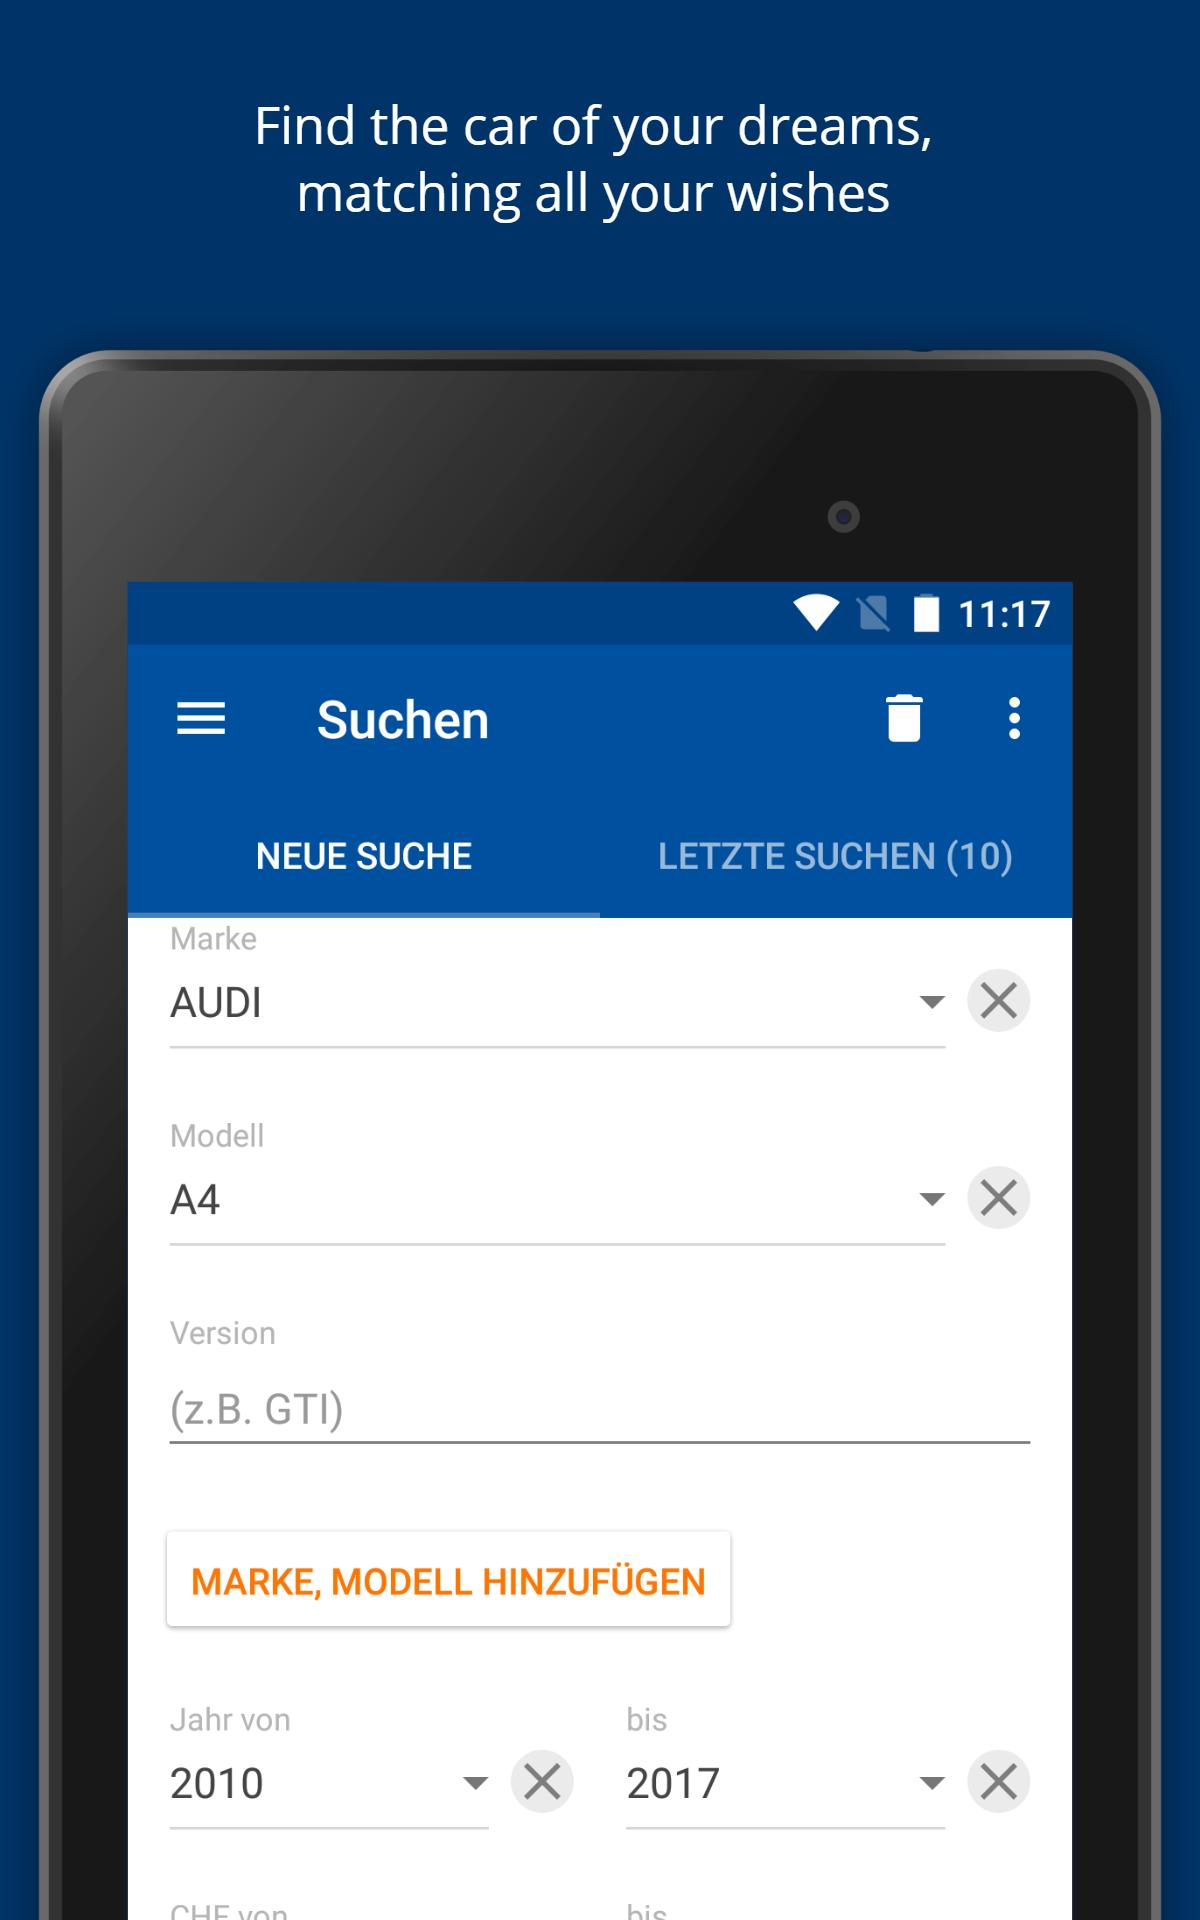 AutoScout24 Switzerland – Find your new car 4.0.0 Screenshot 15